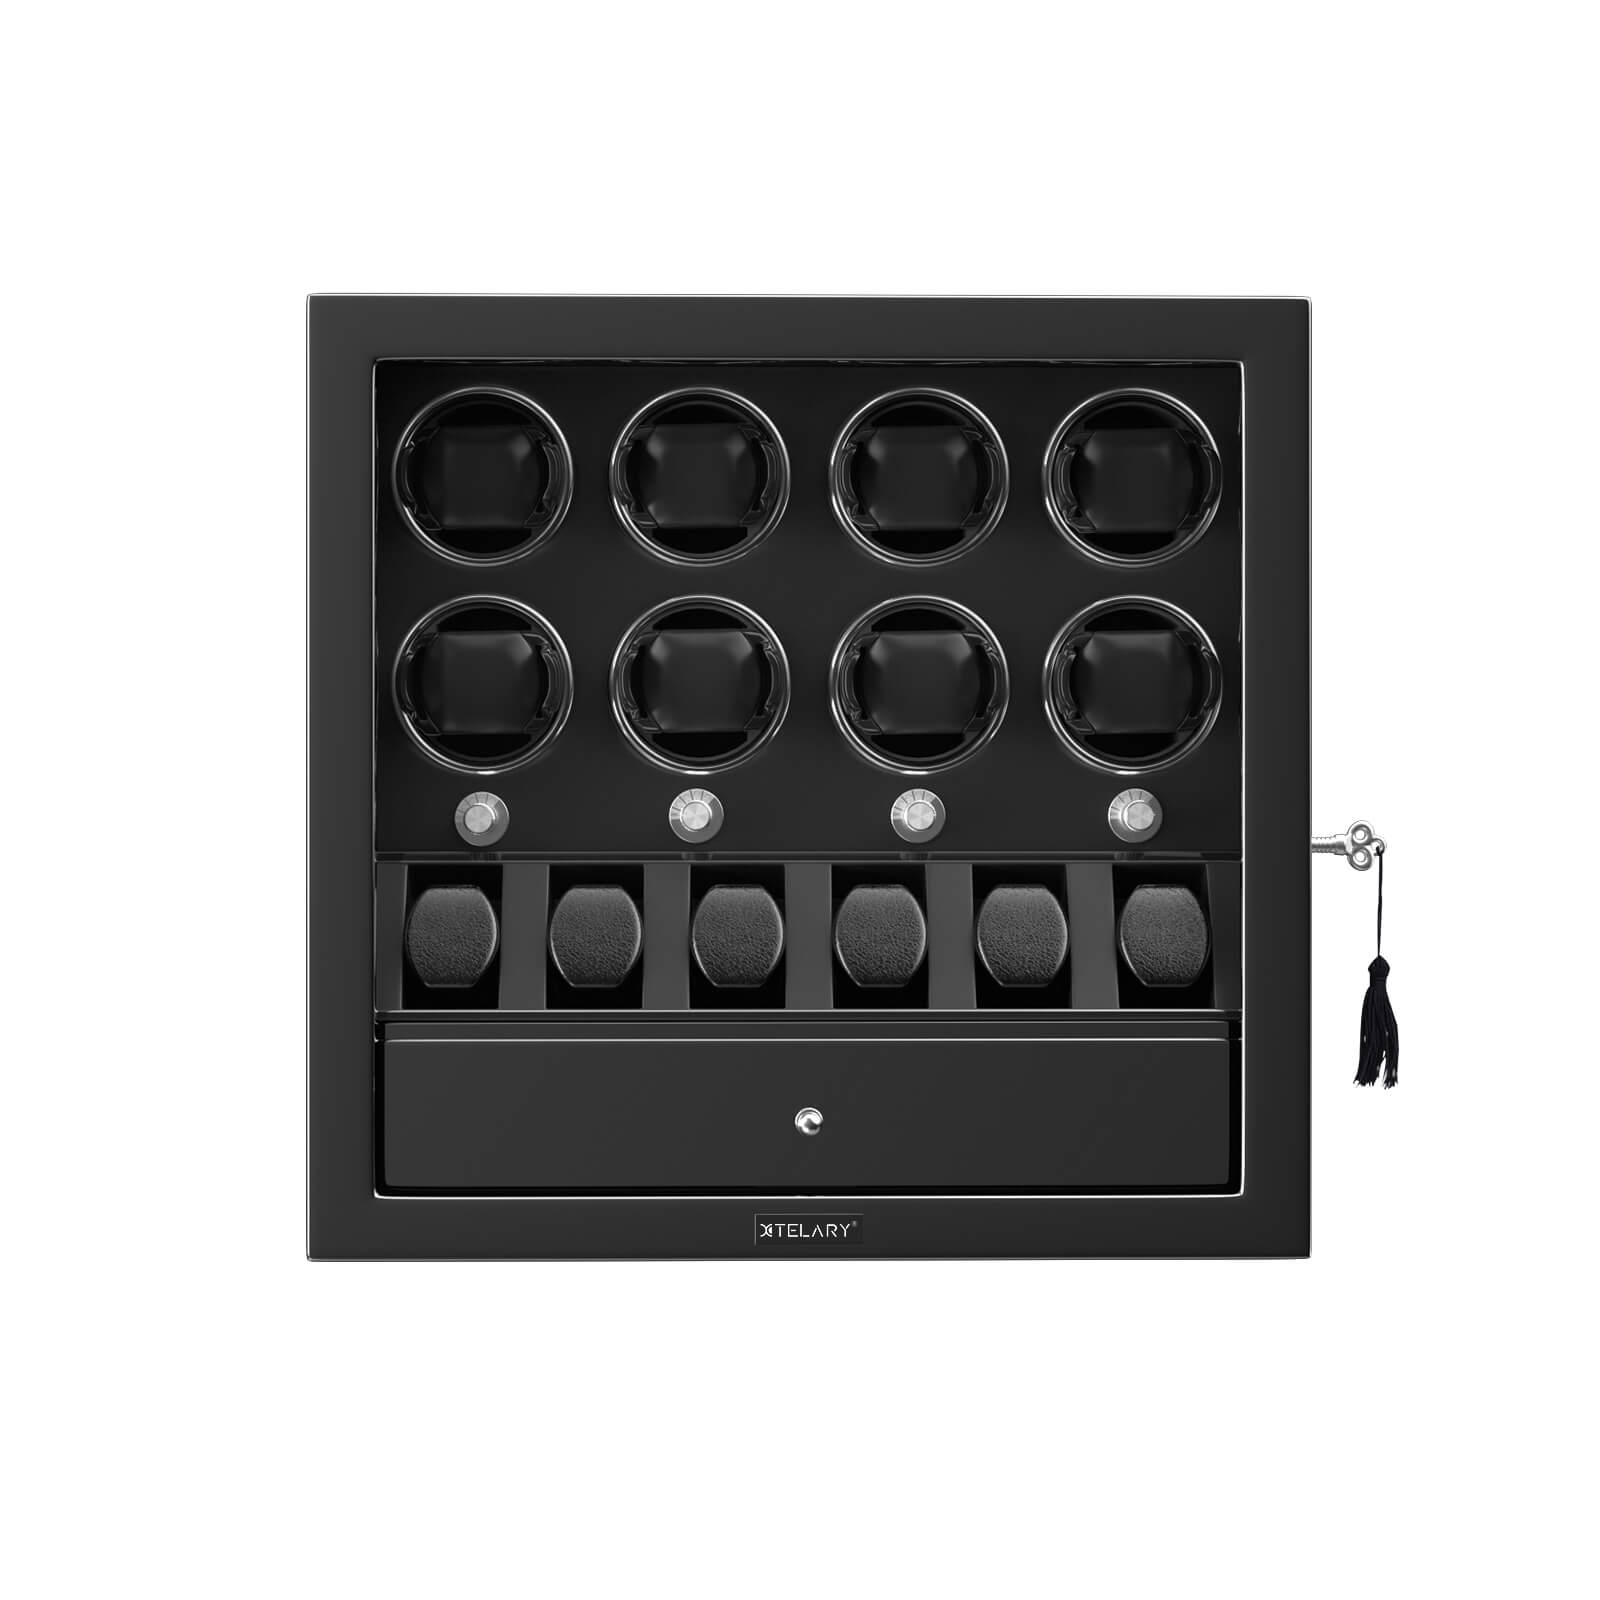 Compact 8 Watch Winders with 6 Watches Organizer Display Case- Black